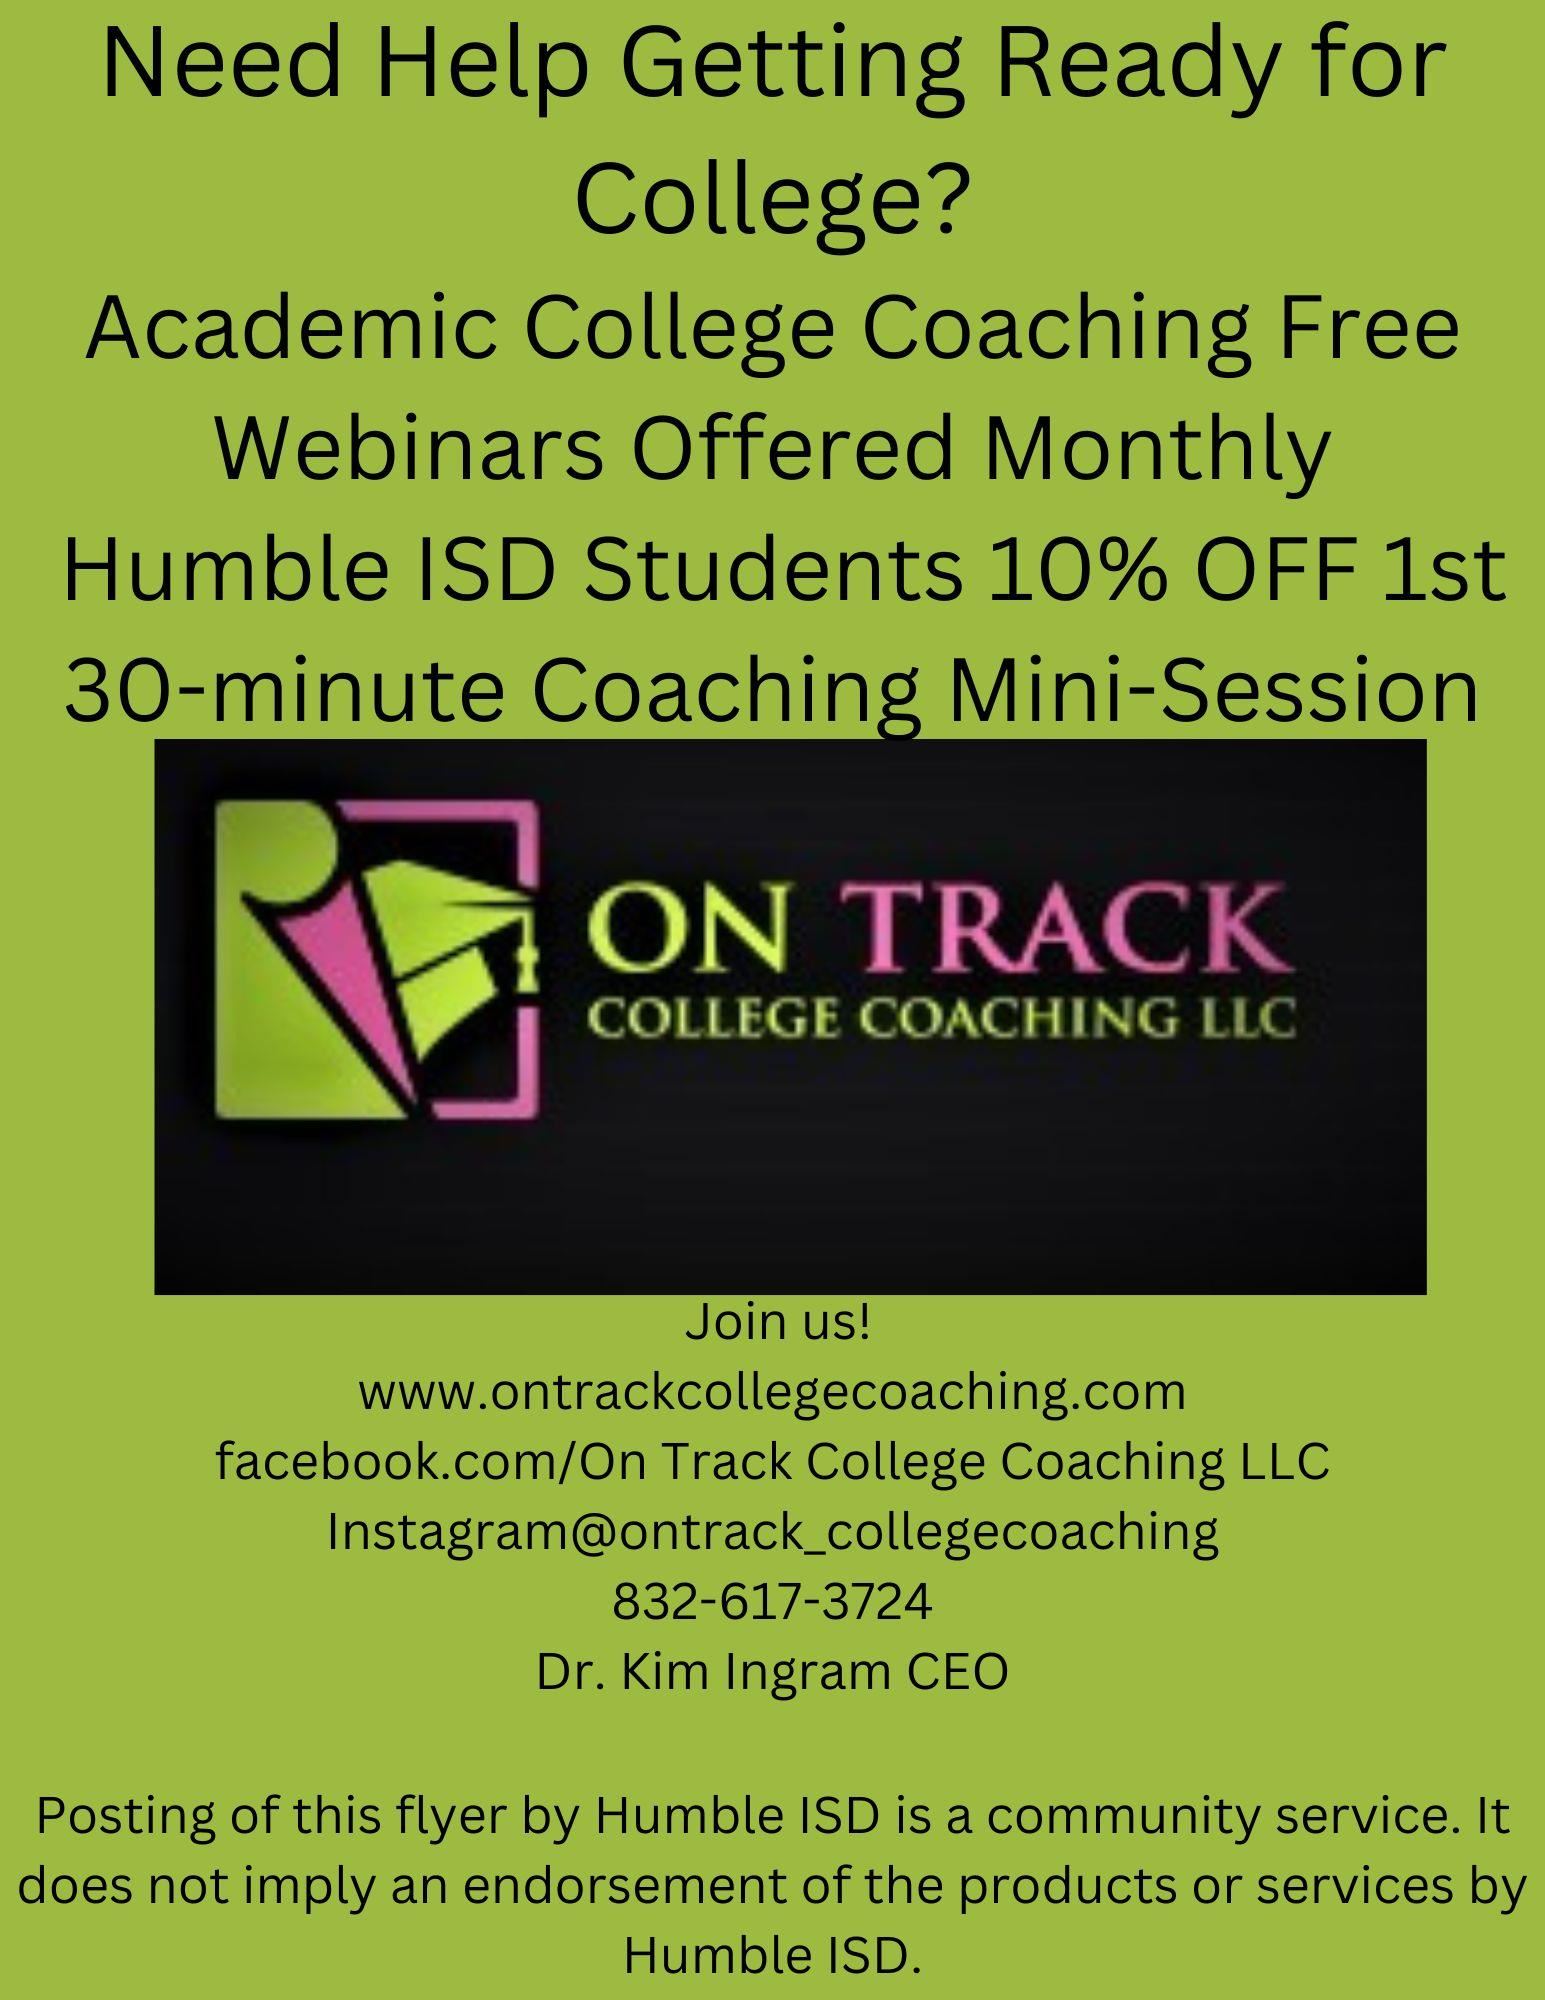 On Track College